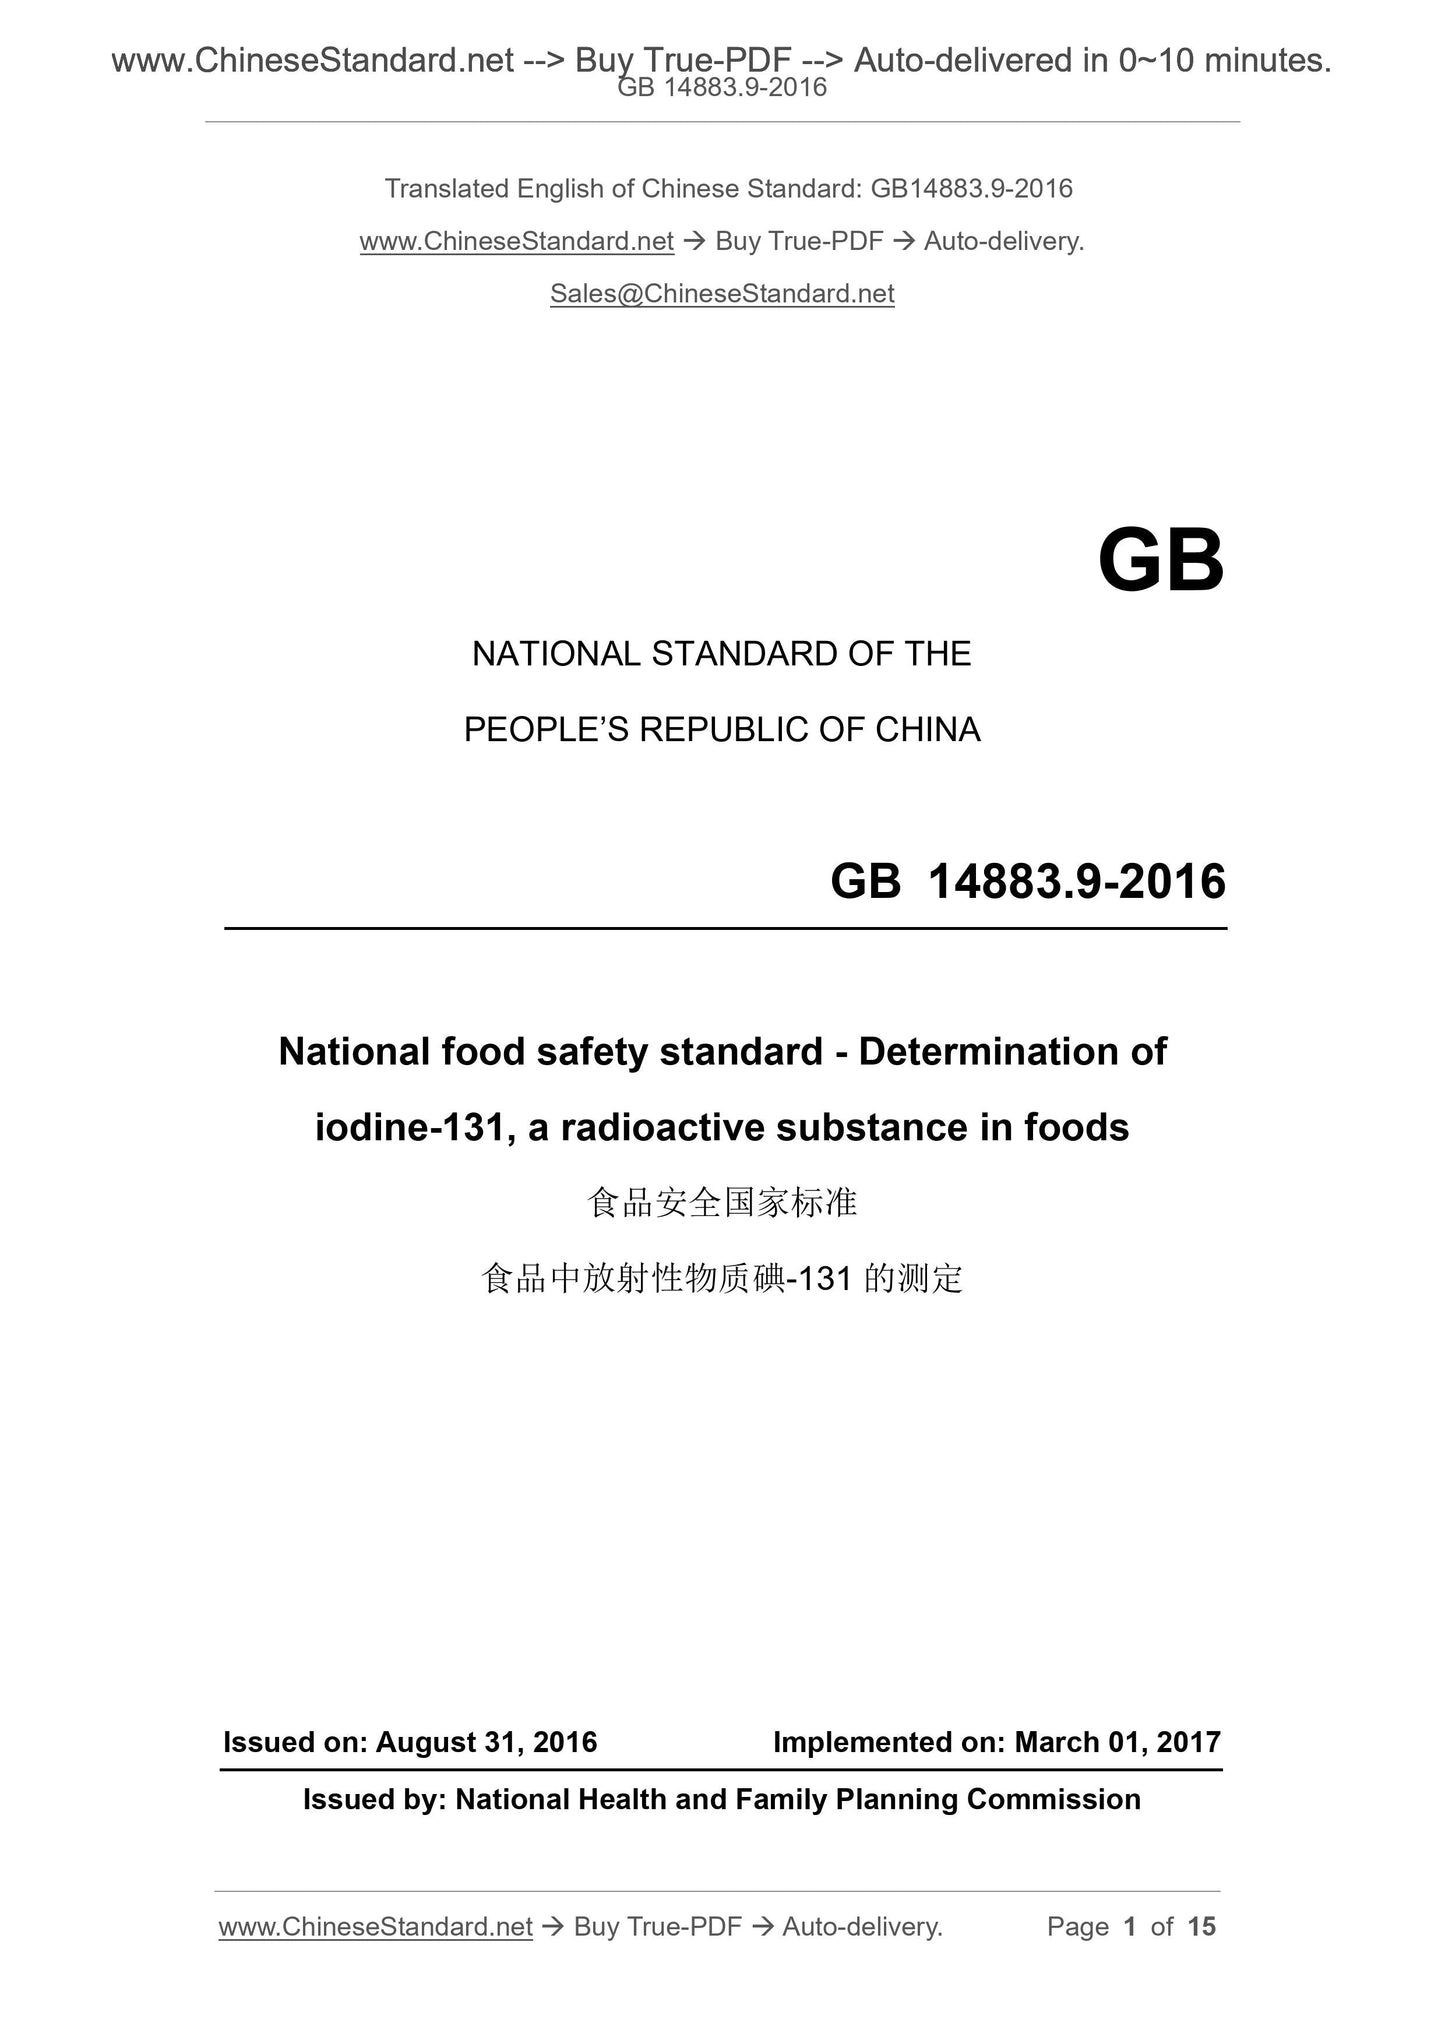 GB 14883.9-2016 Page 1